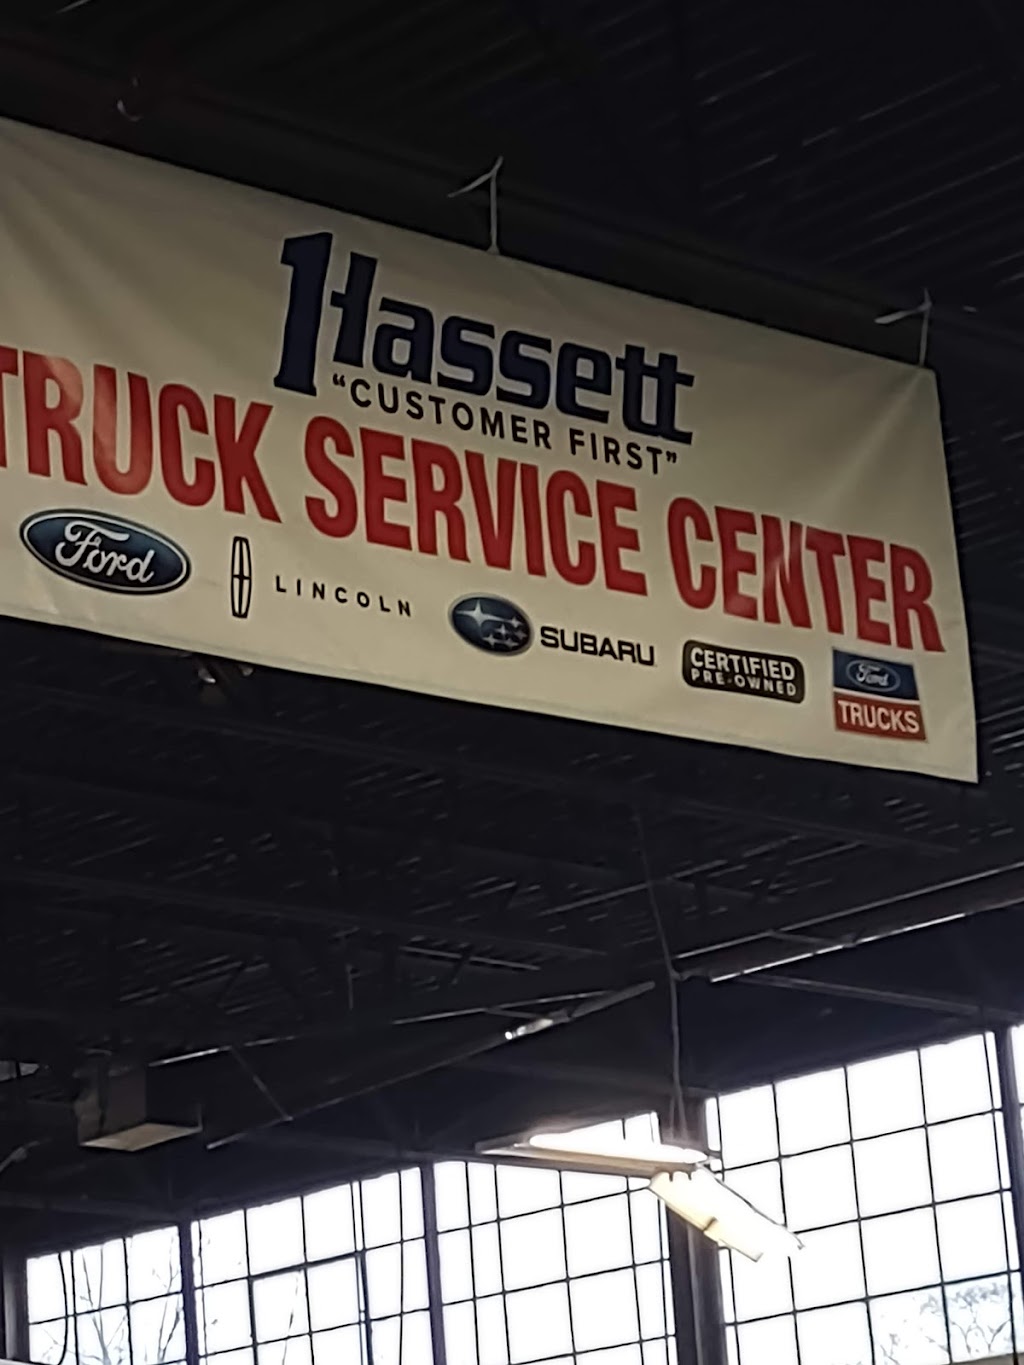 Hassett Truck Center | 1886 Seaford Ave, Wantagh, NY 11793 | Phone: (516) 785-0000